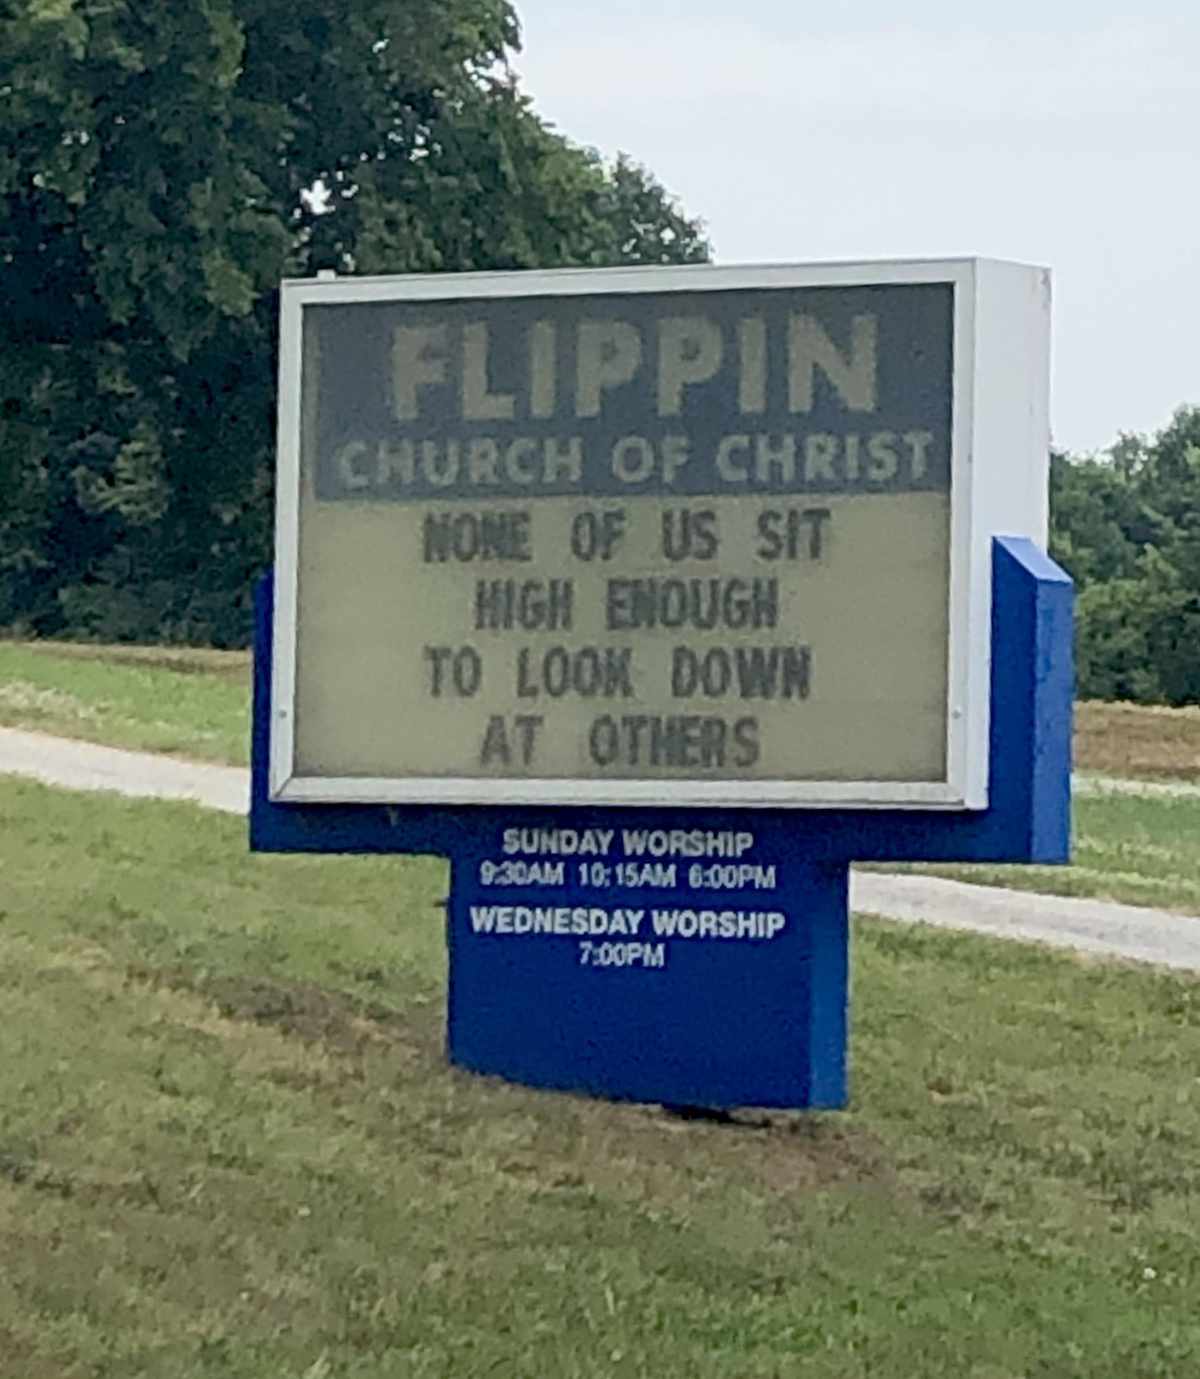 Spotted while on vacation in rural Tennessee